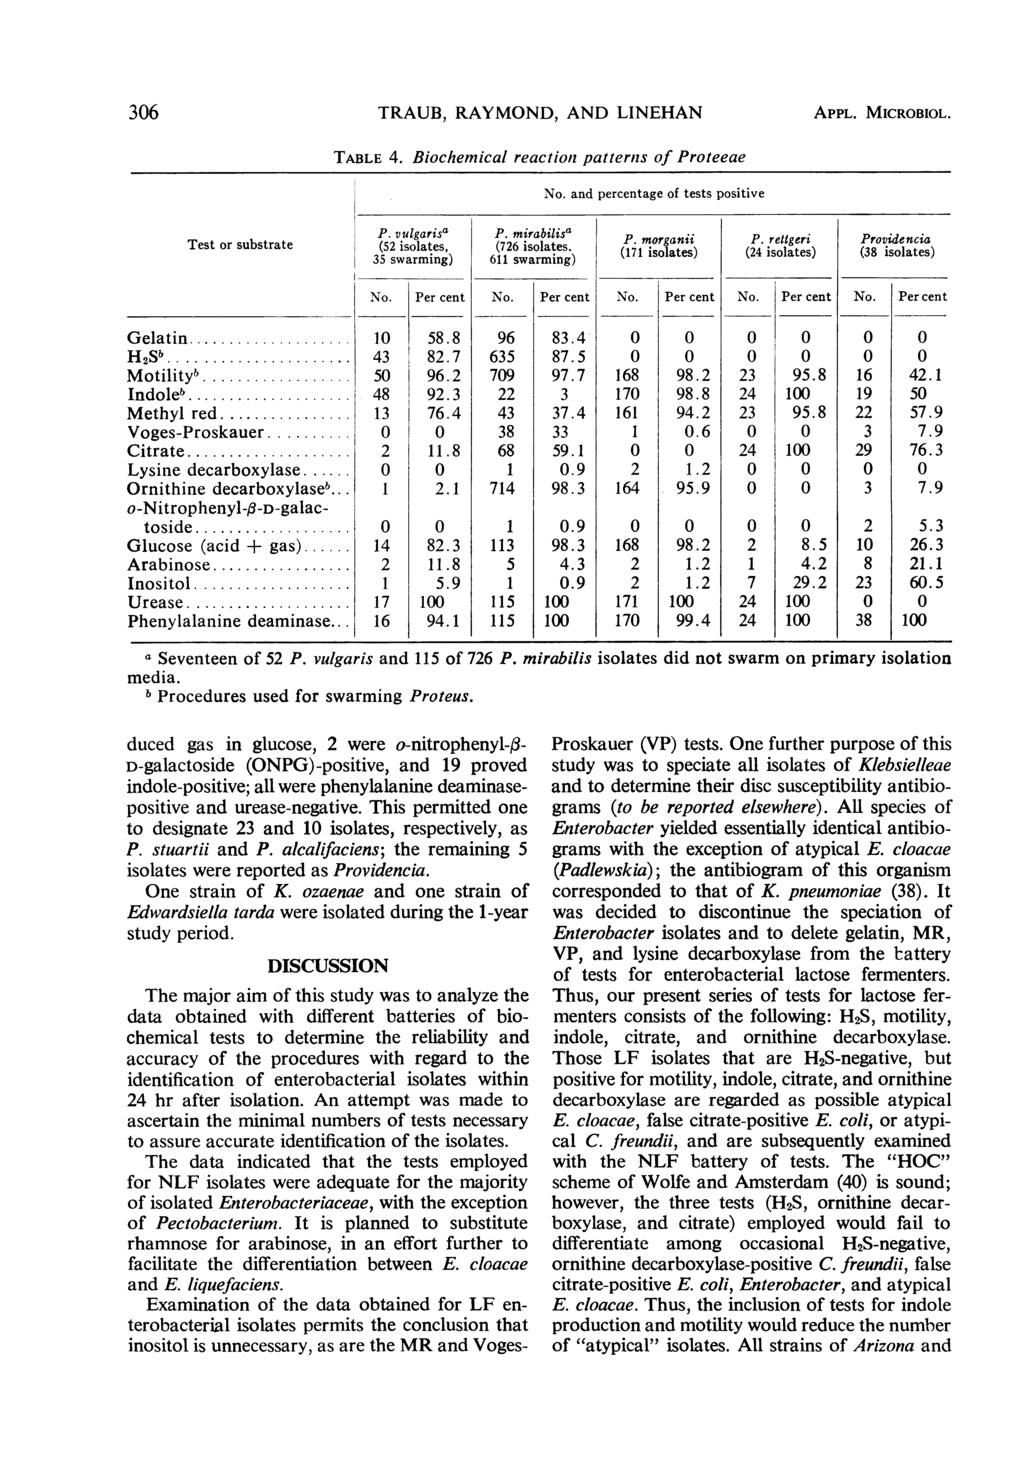 36 TRAUB, RAYMOND, AND LINEHAN APPL. MICROBIOL. TABLE 4. Biochemical reaction patternis of Proteeae Test or substrate P. vulgarisa (52 isolates, 35 swarming) P.